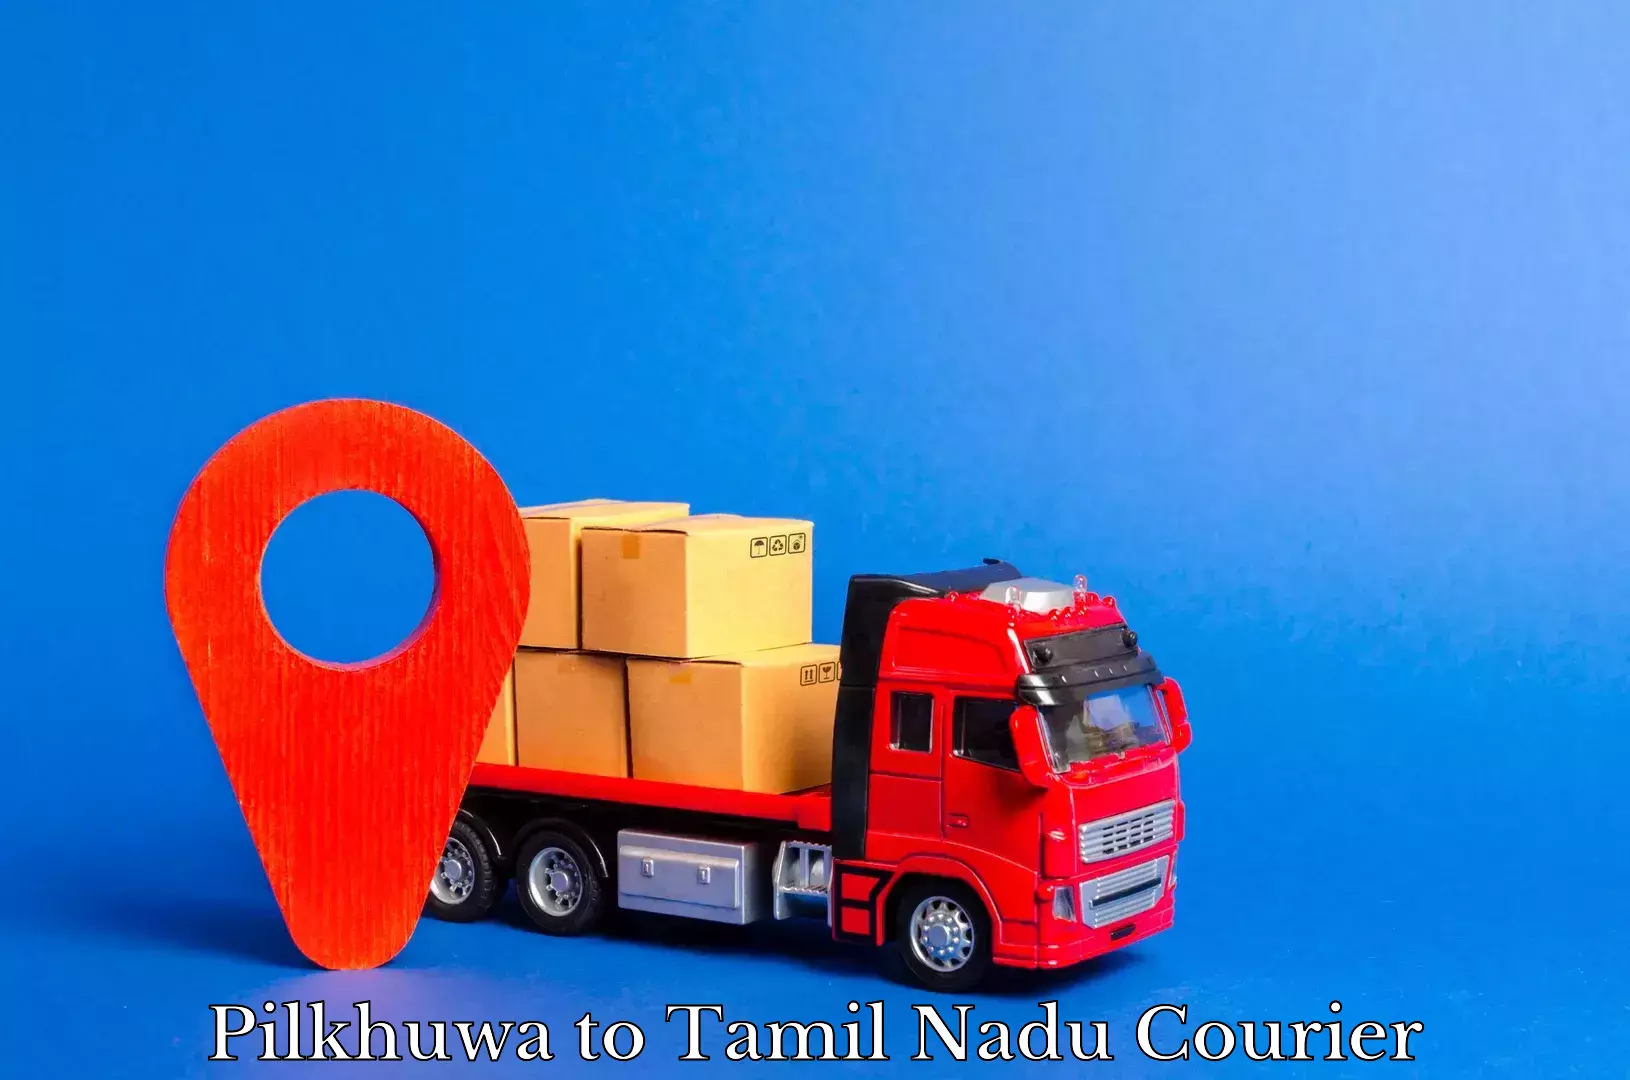 End-to-end delivery Pilkhuwa to Tamil Nadu